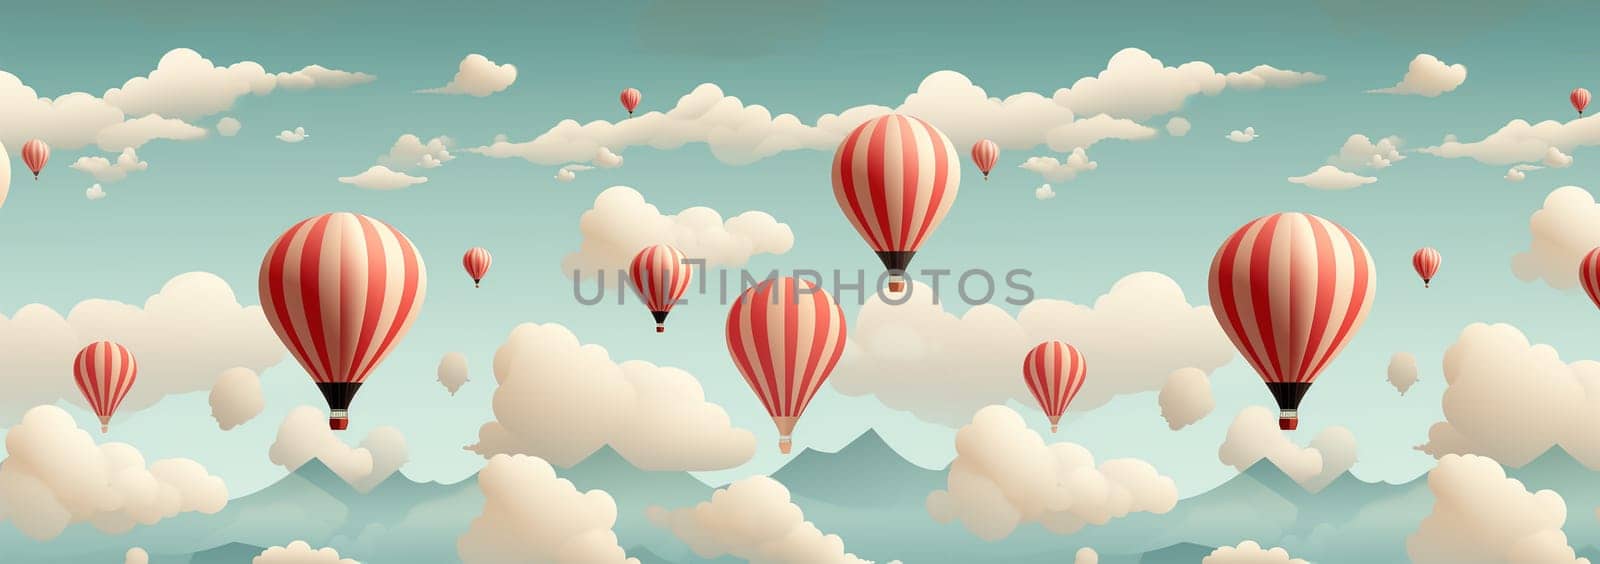 Cute pastel colored Boho seamless pattern with hot air balloons and clouds. Hand drawn balloon in the sky.Pastel neutral shades. Cute baby background. Funny decor for nursery, textiles, clothing, packaging, interior. Copy space